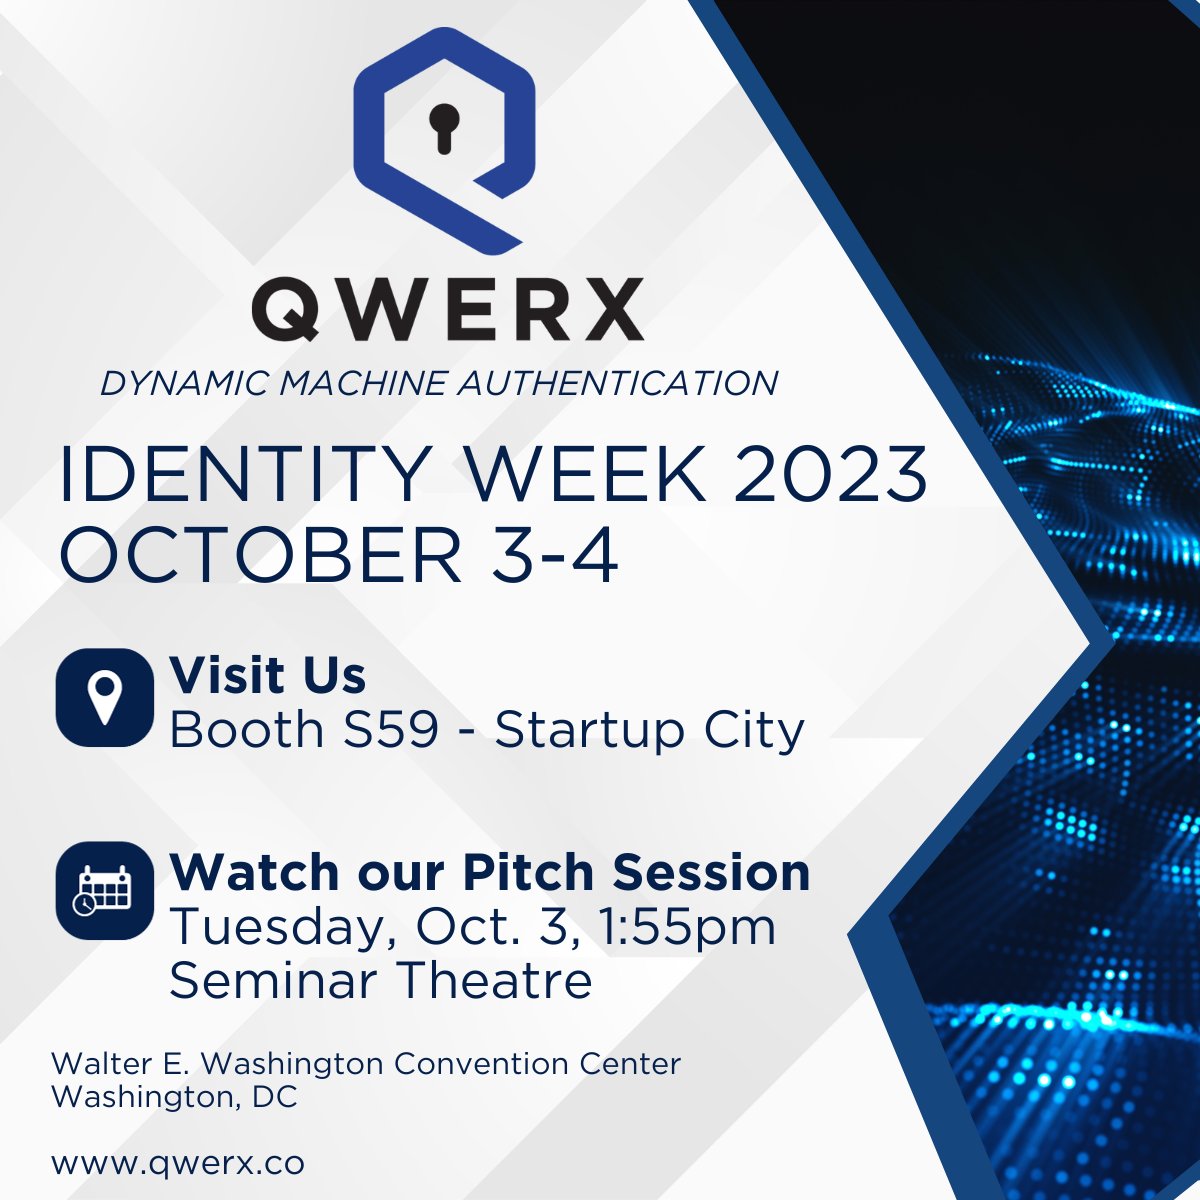 We  are  here  at  #identityweek  today  and  tomorrow  -  come  by  and  meet  our  team!  #identityweekamerica  #dynamic  #machineidentity  #continuousauthentication #quantumproof  #zerotrust  #ephemeralkeyinfrastructure👻